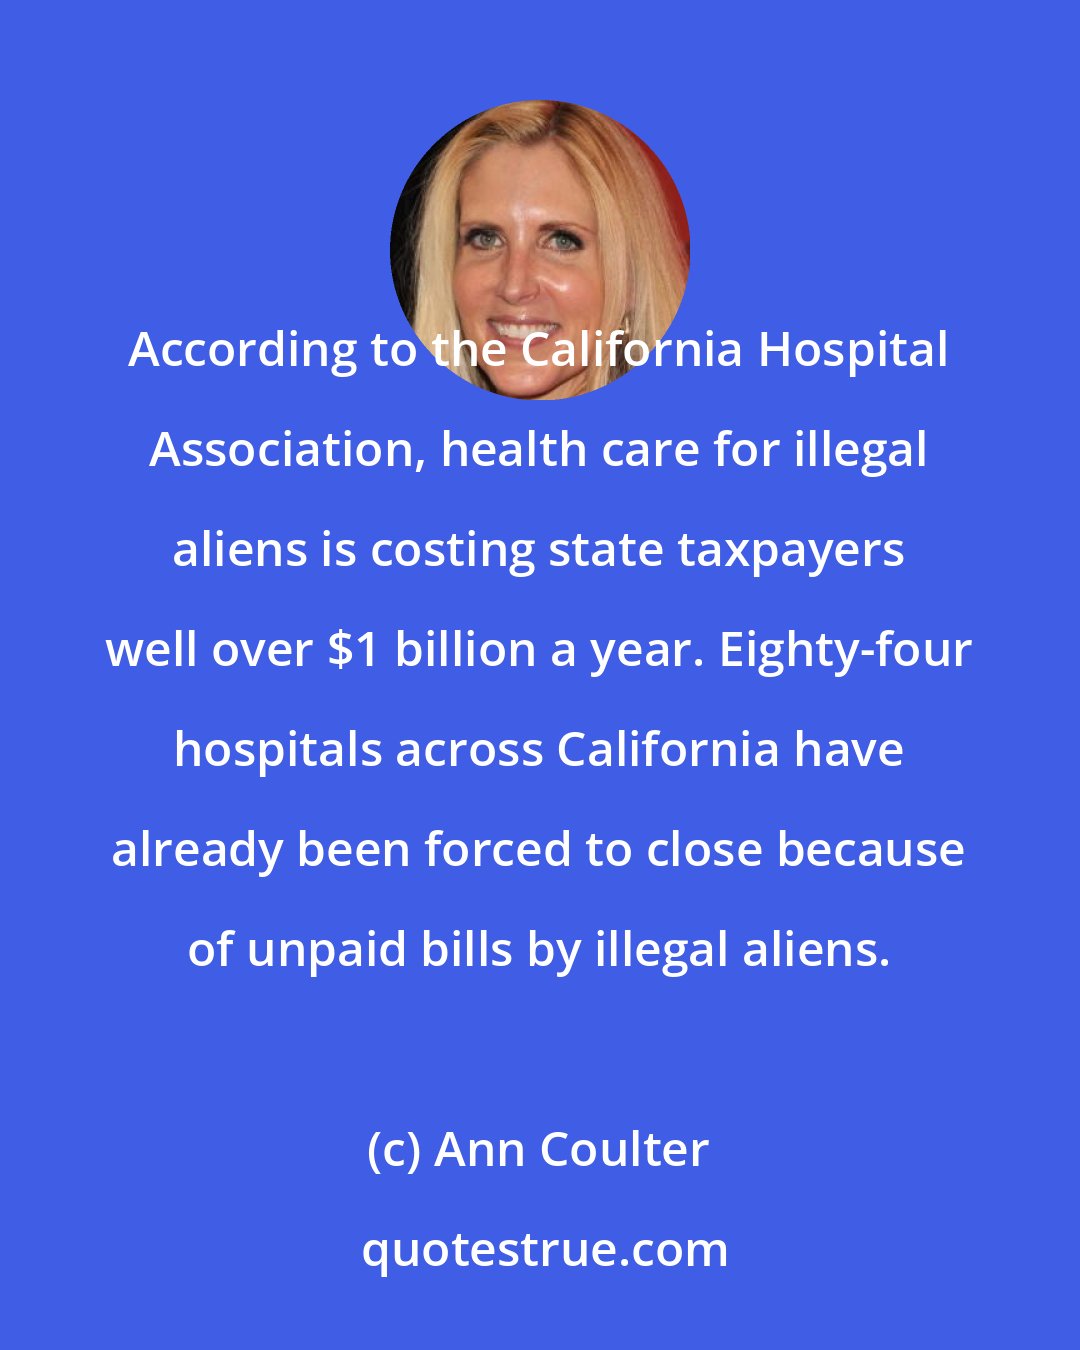 Ann Coulter: According to the California Hospital Association, health care for illegal aliens is costing state taxpayers well over $1 billion a year. Eighty-four hospitals across California have already been forced to close because of unpaid bills by illegal aliens.